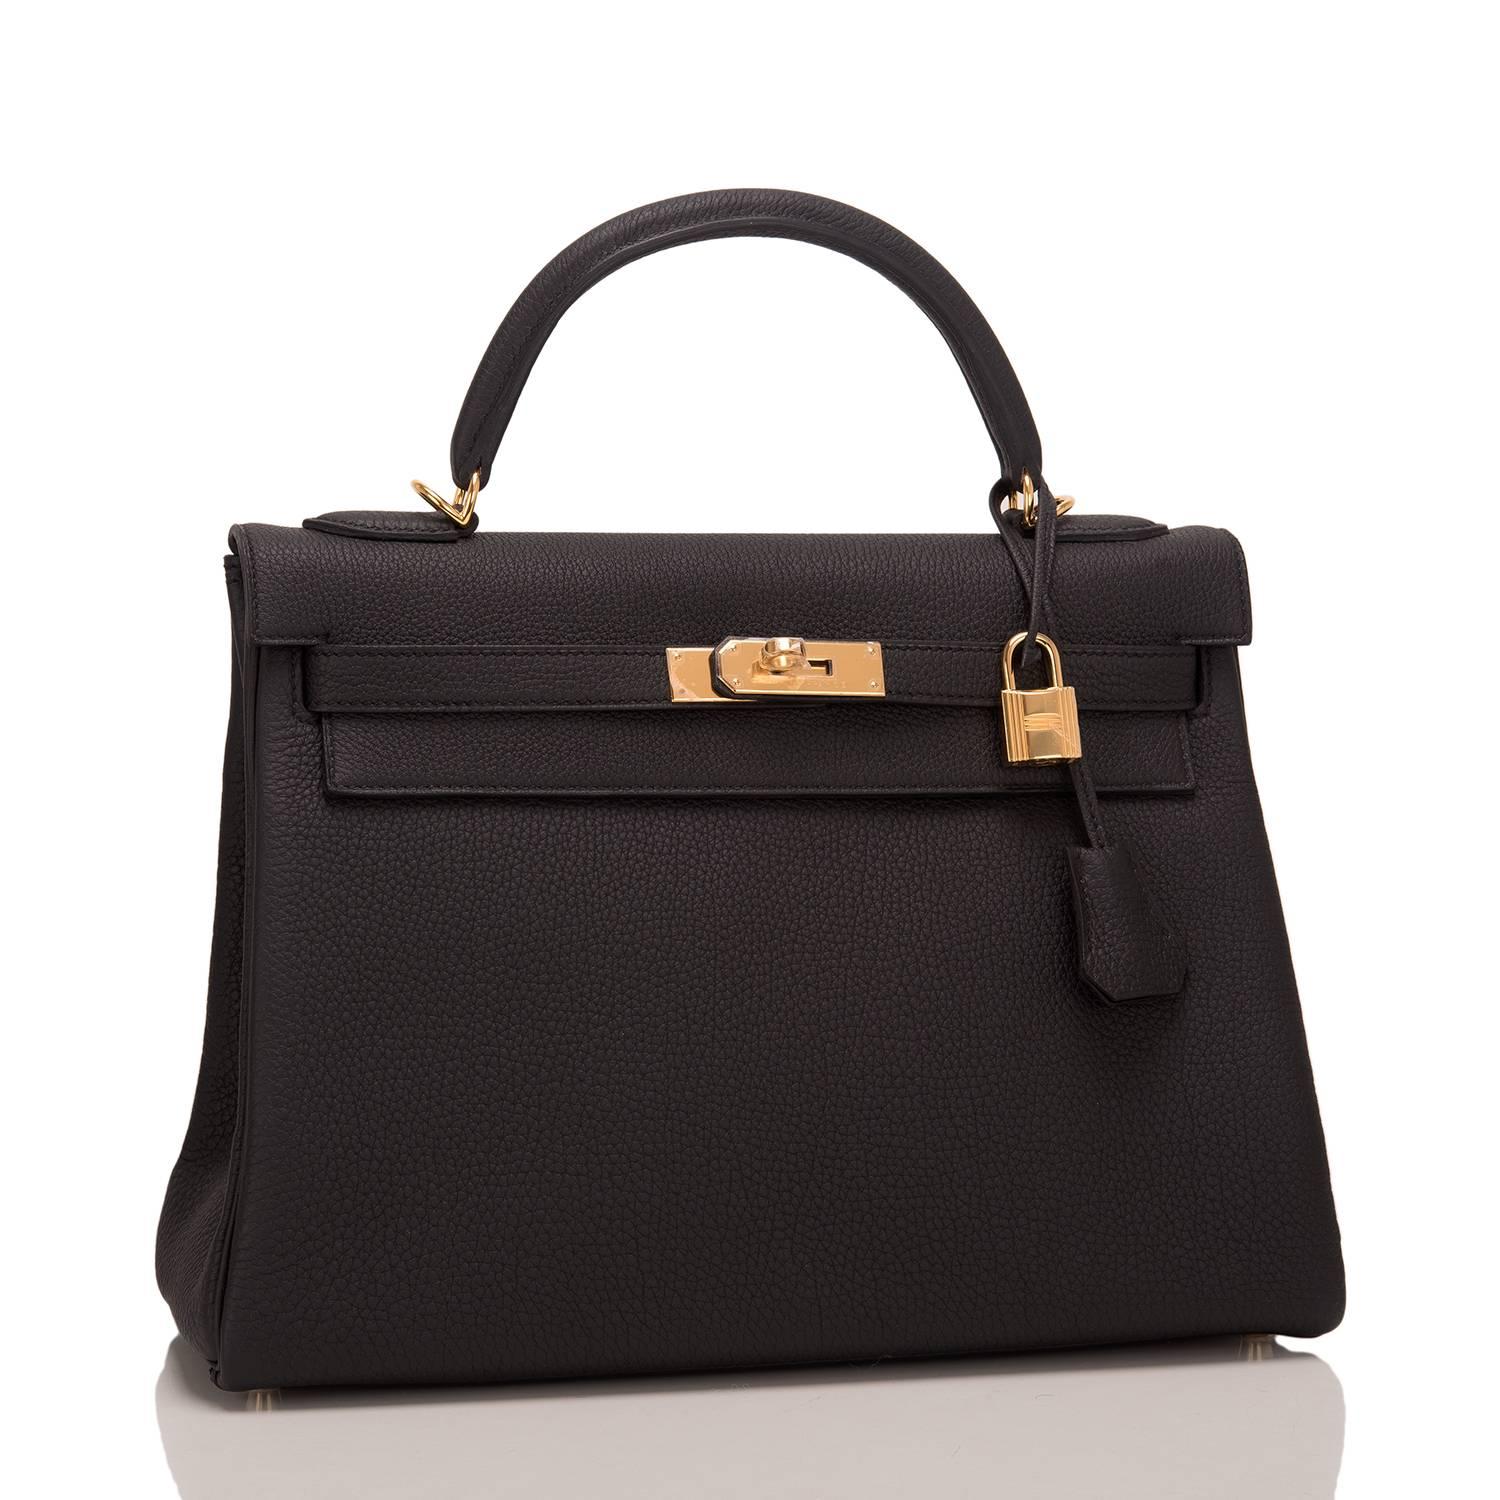 Hermes Black Kelly 32cm of togo leather with gold hardware.

This Kelly, in the Retourne style, has tonal stitching, a front toggle closure, a clochette with lock and two keys, a single rolled handle, and a removable shoulder strap.

The interior is